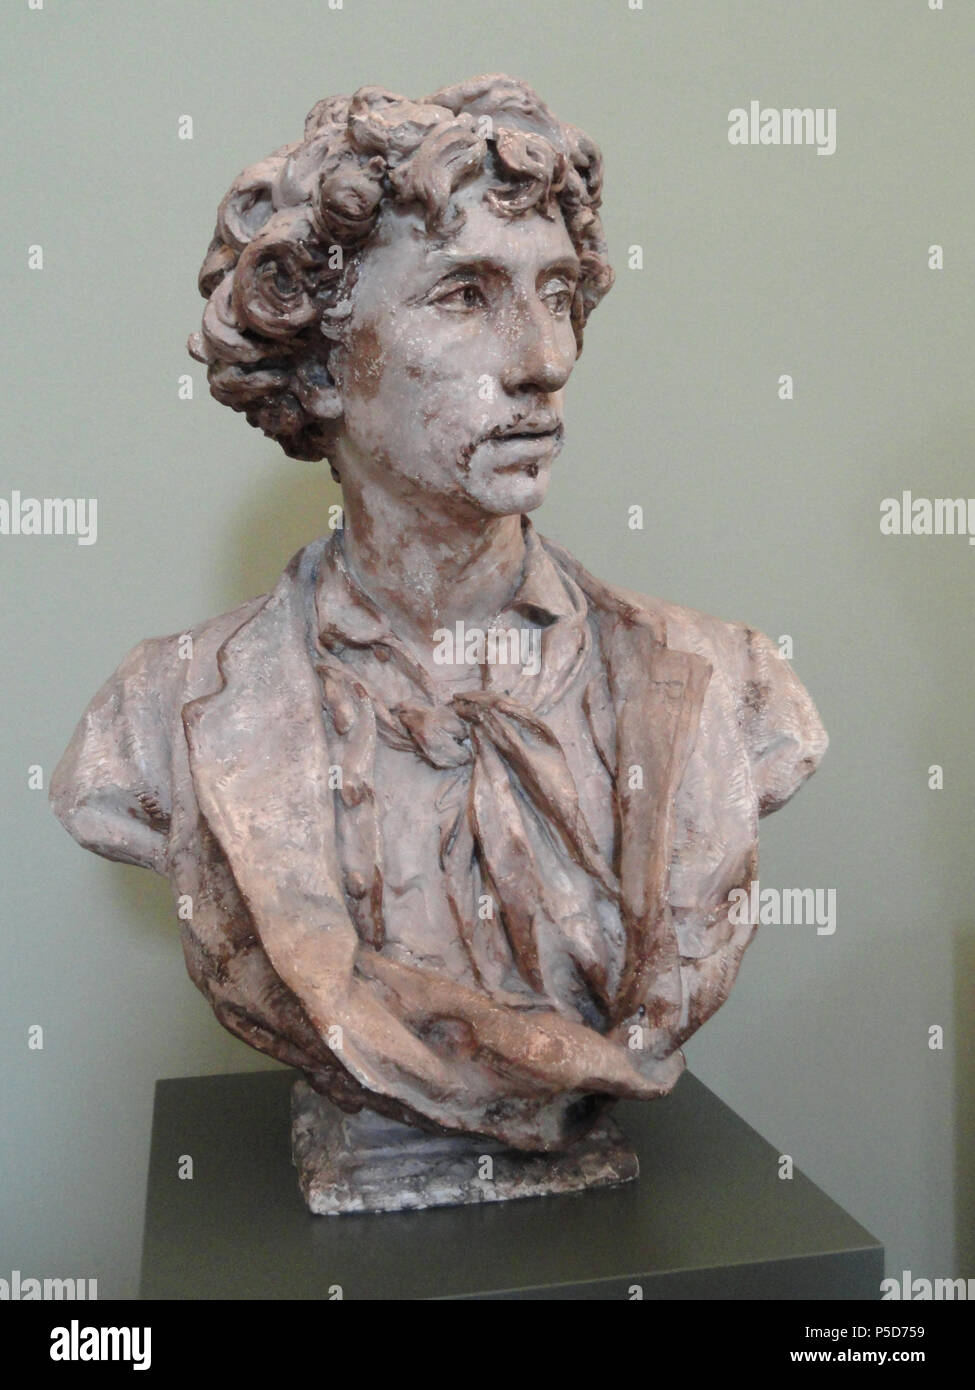 N/A. English: Charles Garnier, architect of the Palais Garnier in Paris, plaster bust (68 cm high) created by Jean-Baptiste Carpeaux in 1869, possibly as the model for the galvanoplastic bronze bust (executed by Christofle), which is on display in the Grand Foyer of the Palais Garnier. This plaster version , located at Ny Carlsberg Glyptotek in Copenhagen, was obtained from Amélie Carpeaux, the sculptor's wife.[1][2] . 1869 (bust) 2012-05-12 09:44:13 (photograph). Sculptor:   Jean-Baptiste Carpeaux  (1827–1875)     Alternative names Jean Baptiste Carpeaux; Jules Carpeaux; Ernest Blagny; jean p Stock Photo